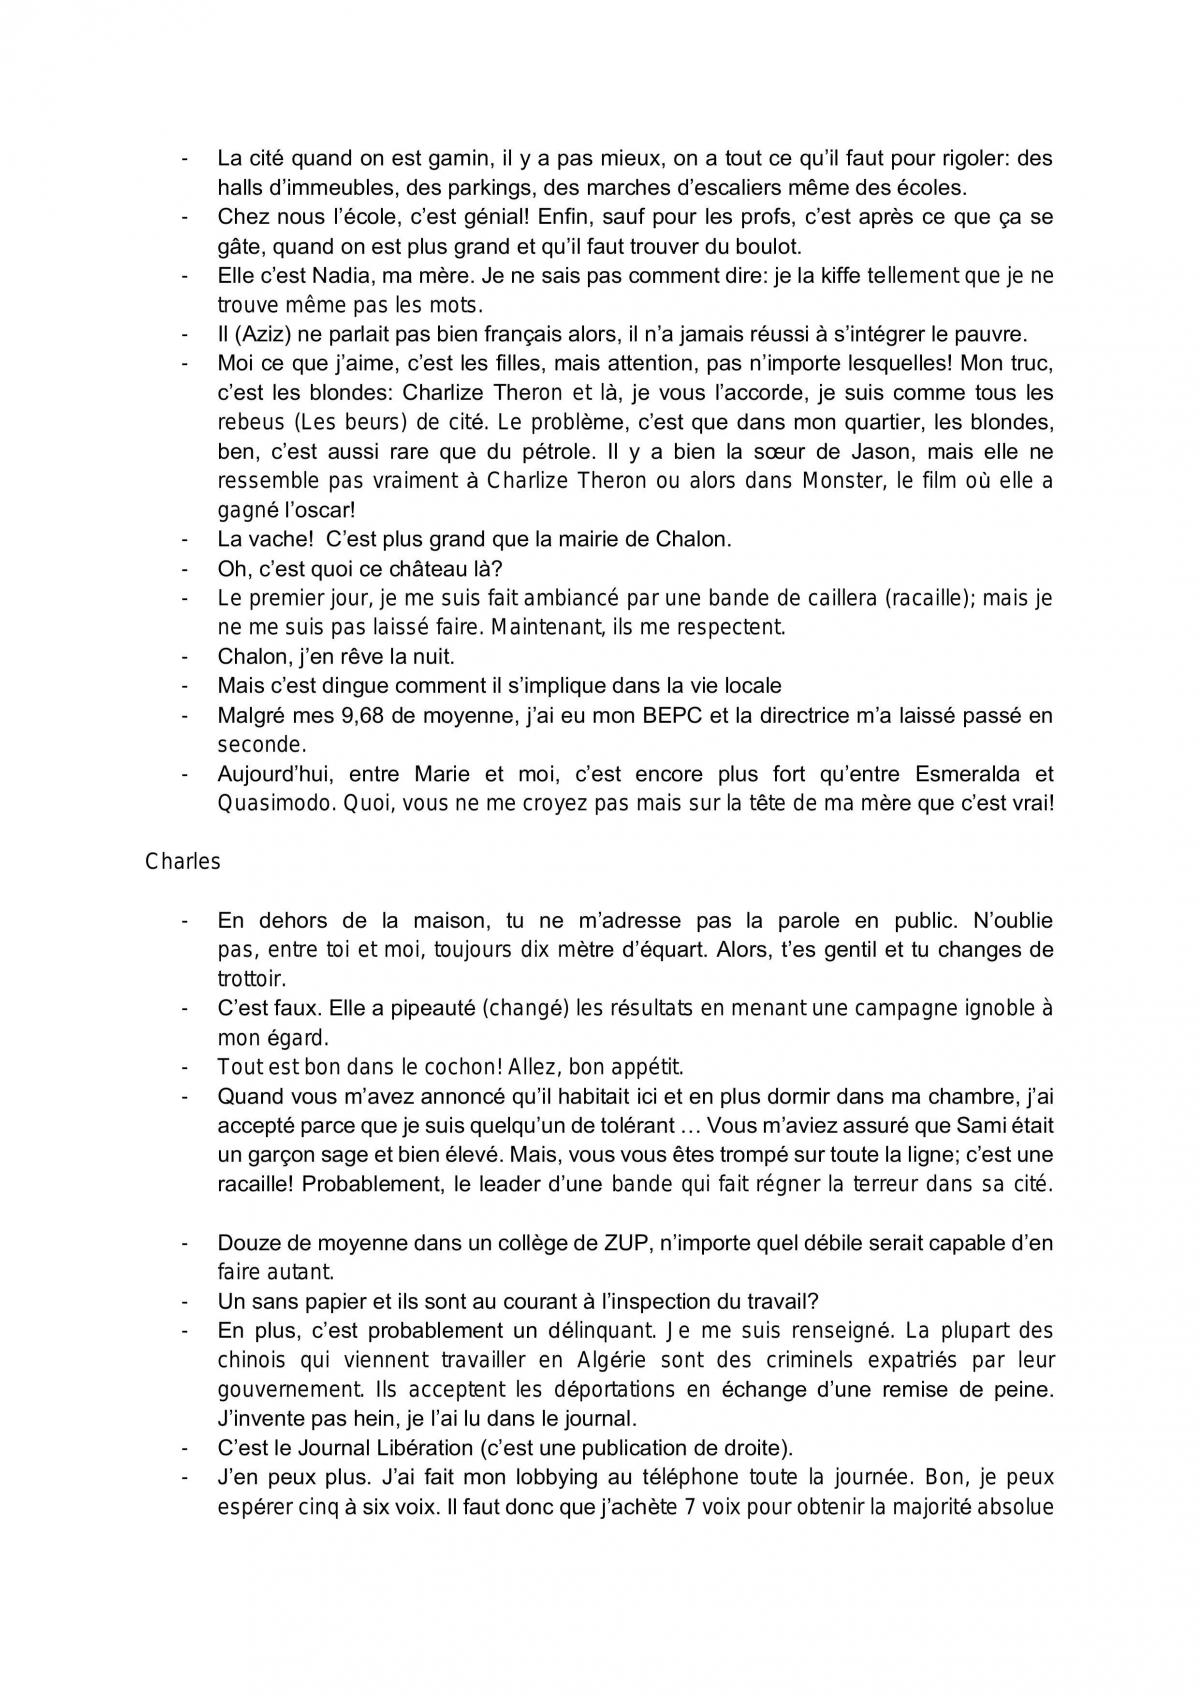 FRNC3690 Detailed Notes for Exam - Page 23